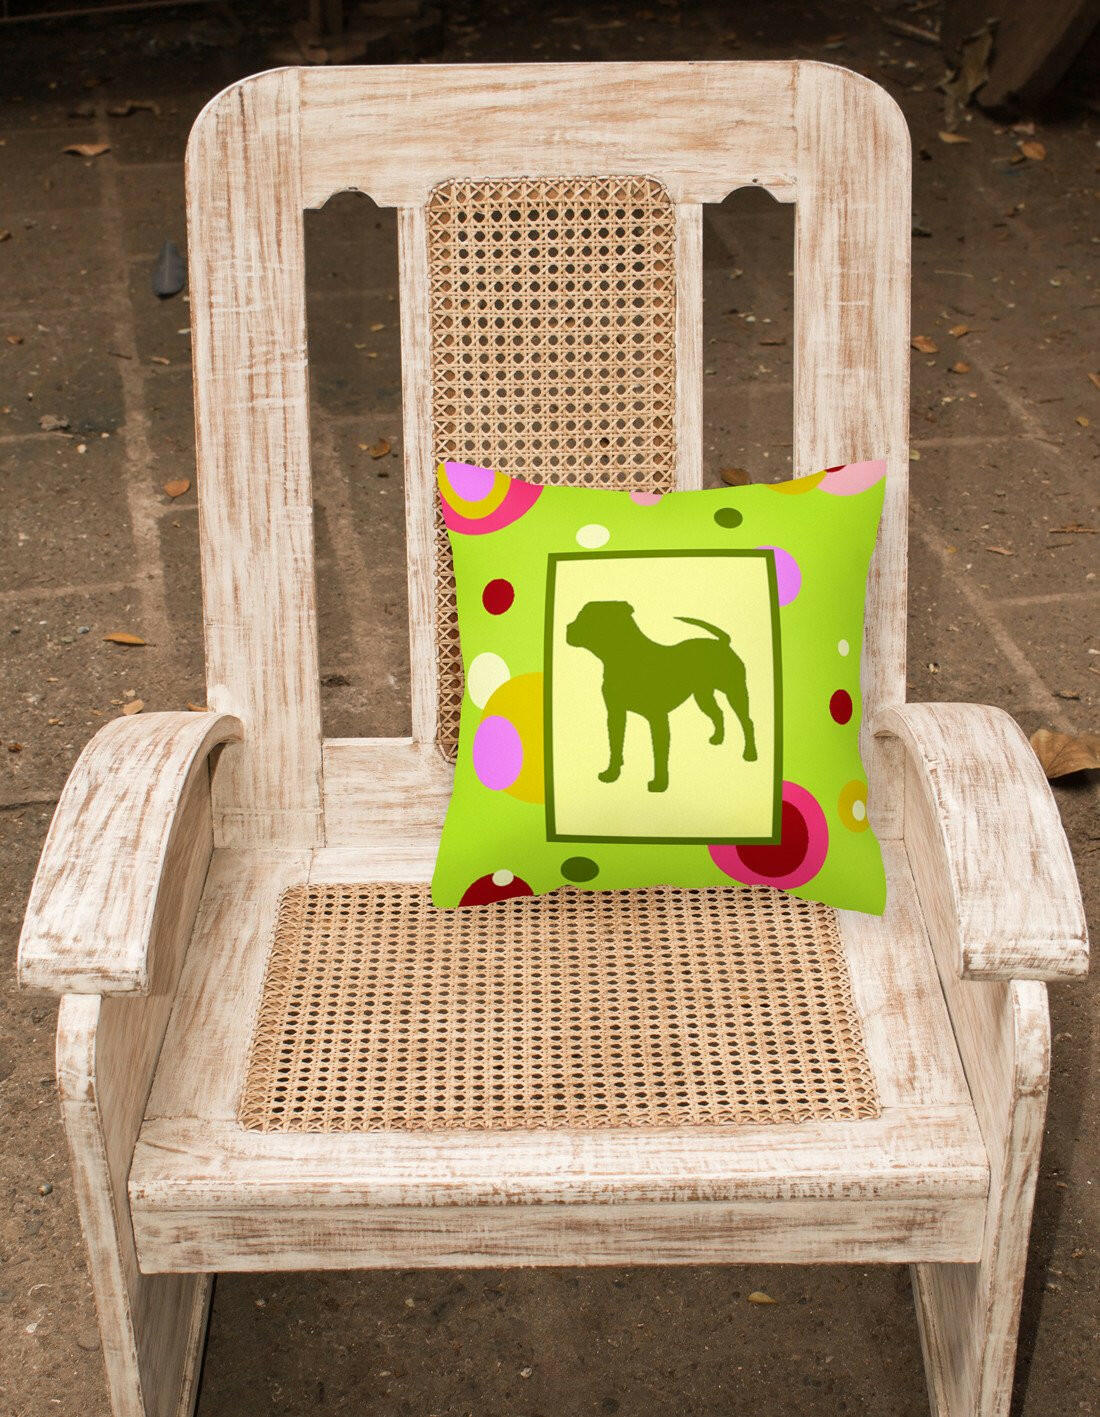 Lime Green Dots Pit Bull Fabric Decorative Pillow CK1153PW1414 by Caroline's Treasures